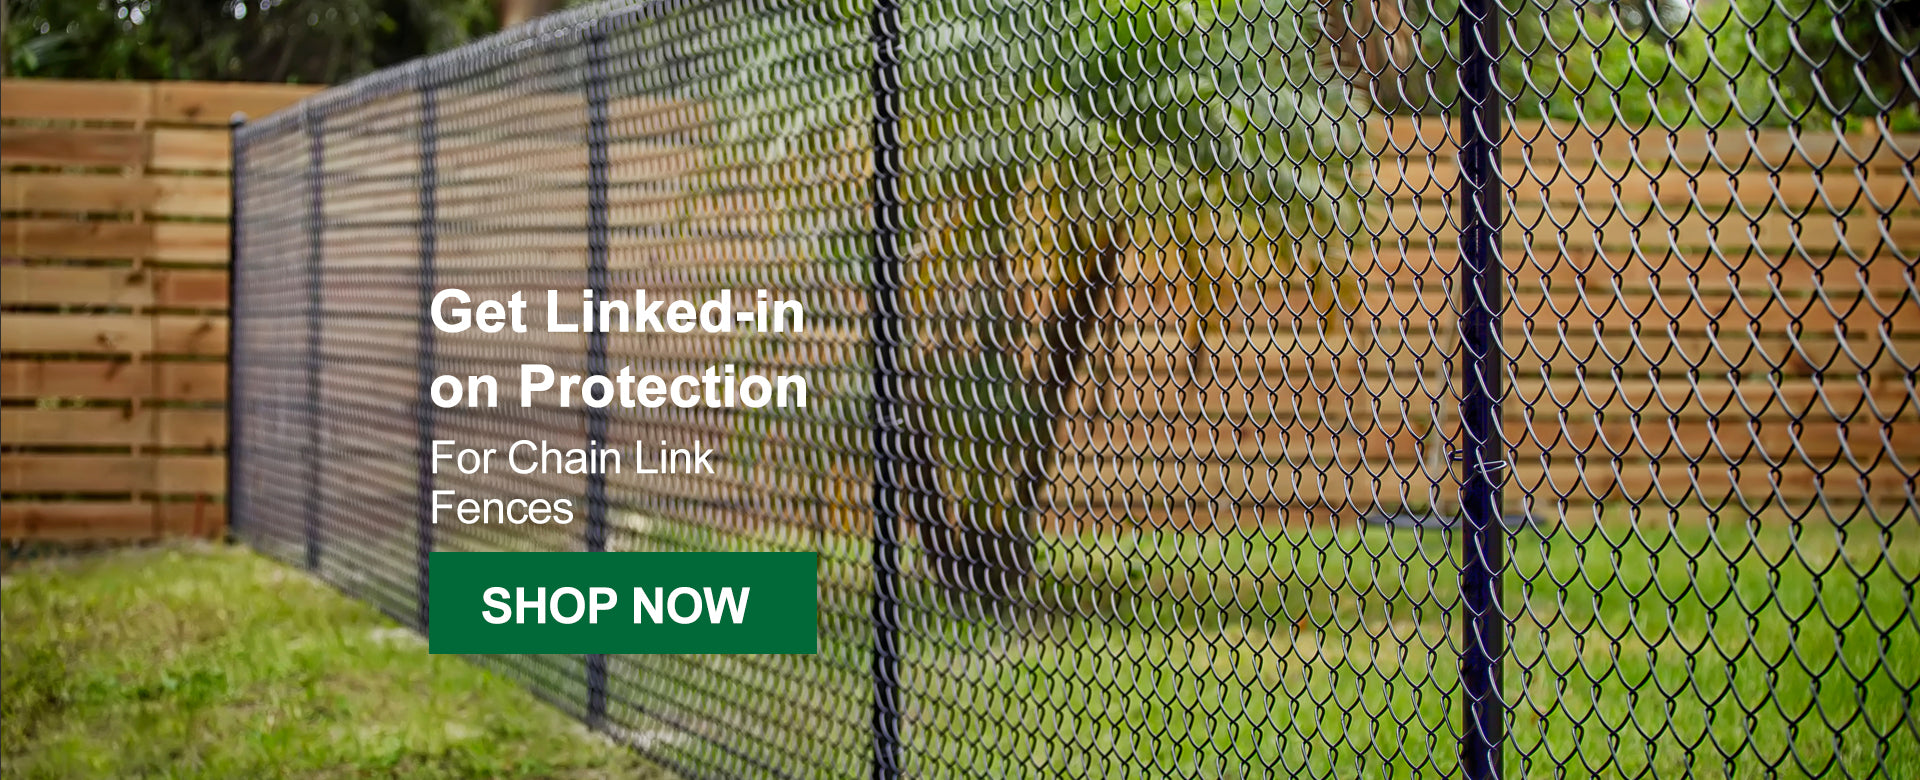 Chain Link Fence Protection